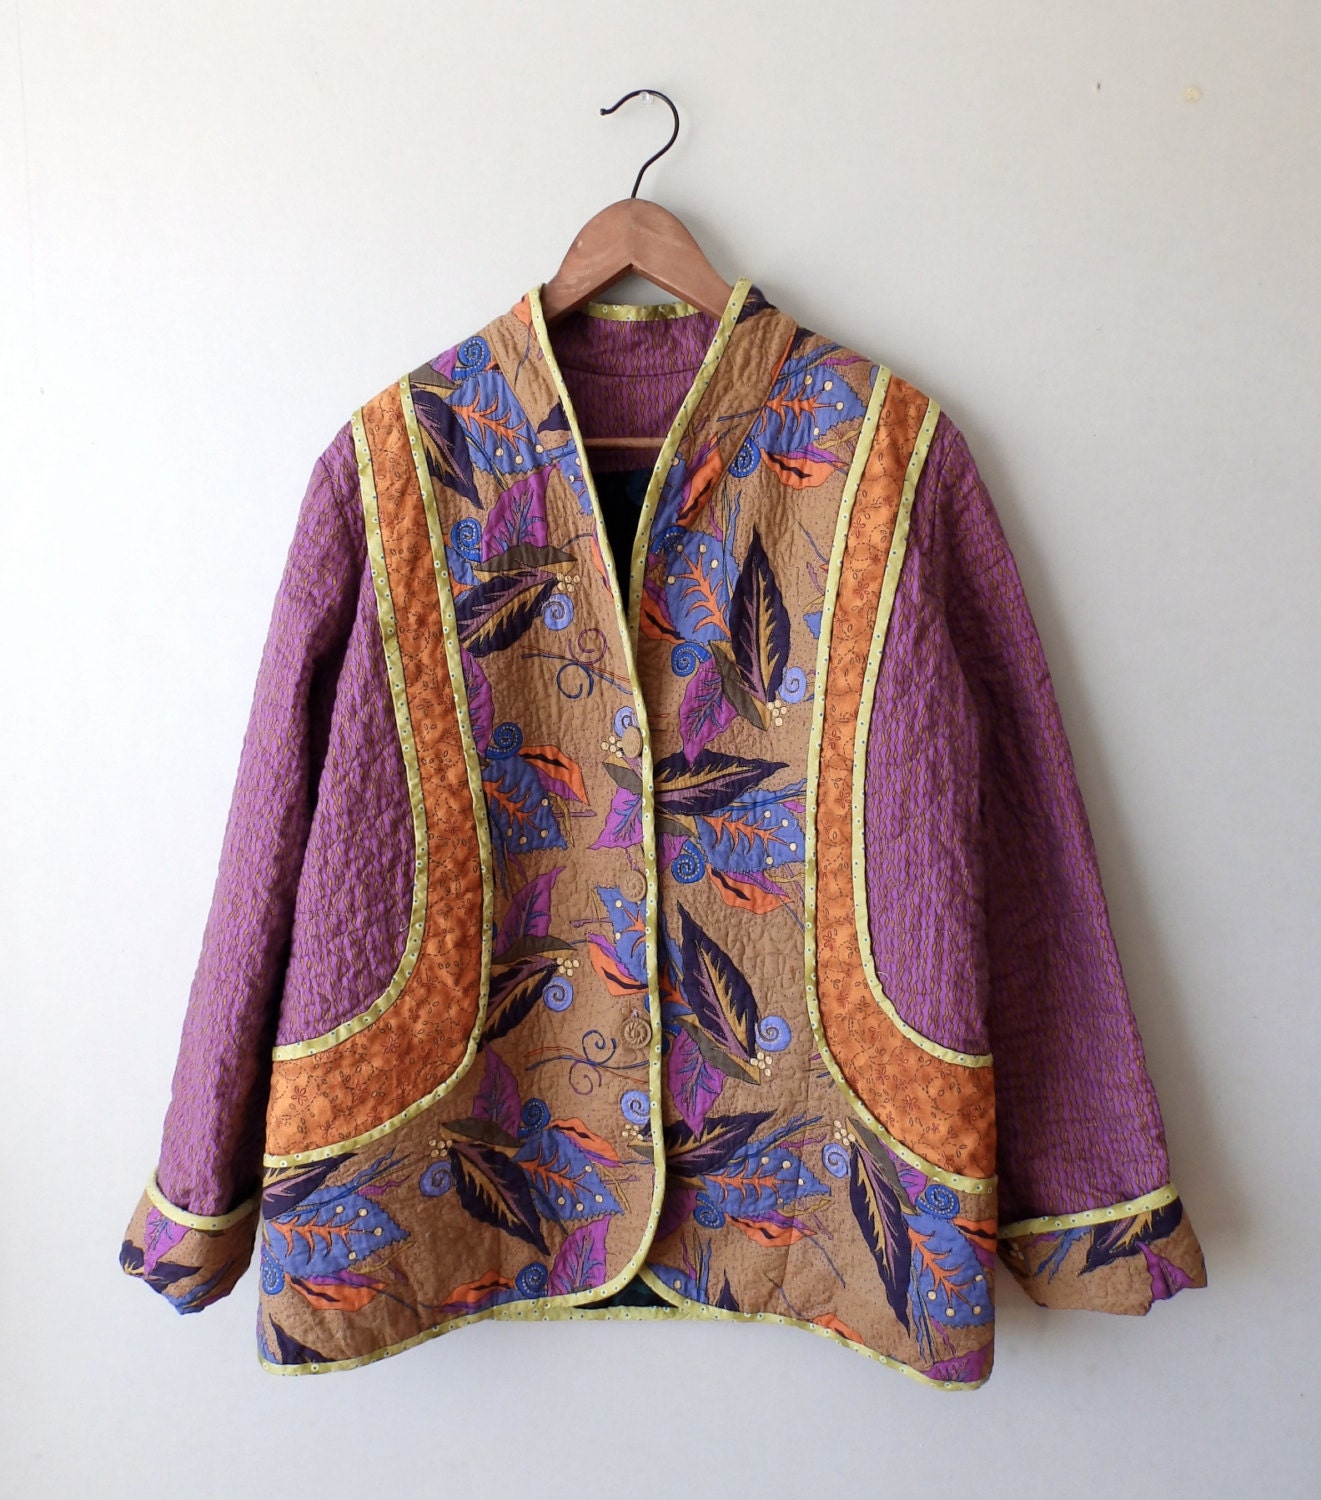 Magical Purple Quilted Hippie Jacket by LittleVisionsThrift